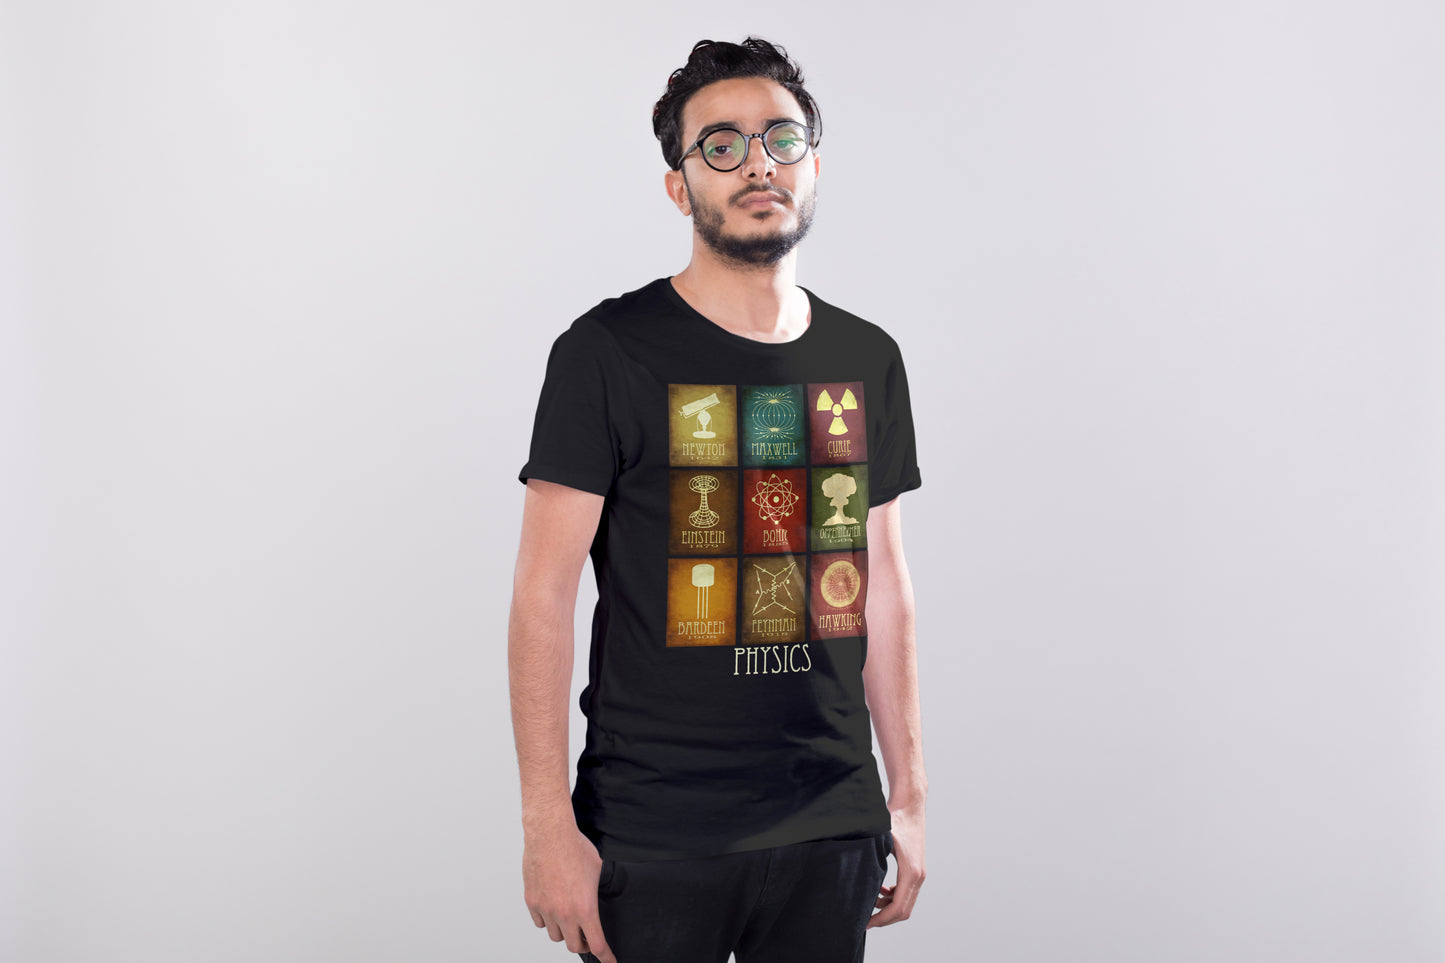 Physics T-shirt, 9 Physicists in History